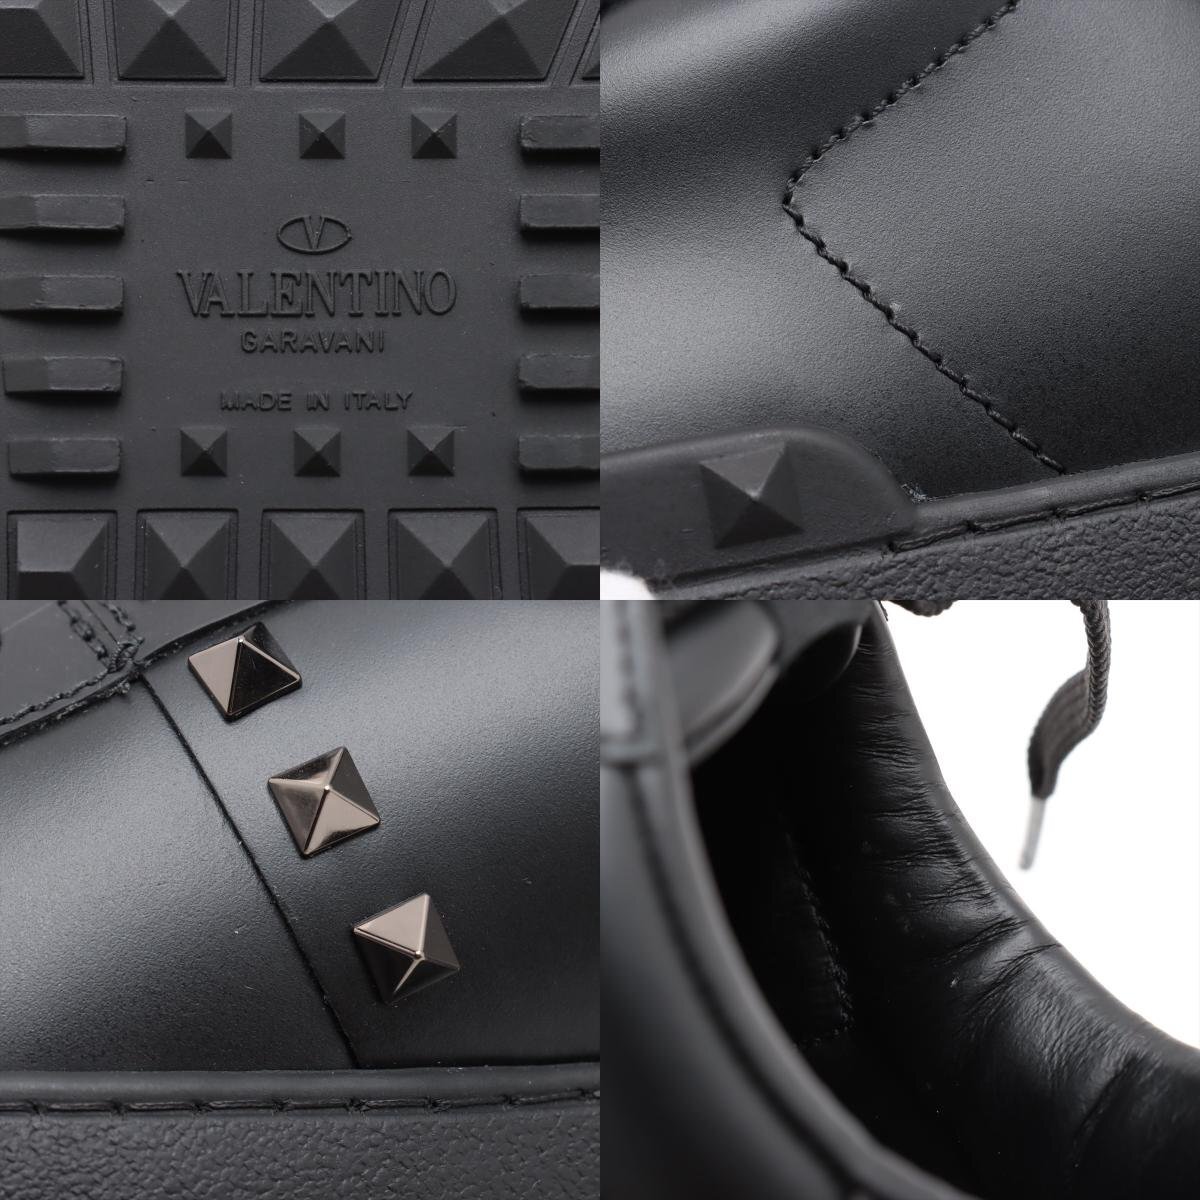 1 jpy as good as new Valentino galava-ni lock studs Untitled do leather sneakers 44 29cm corresponding shoes shoes men's EEM Y9-1